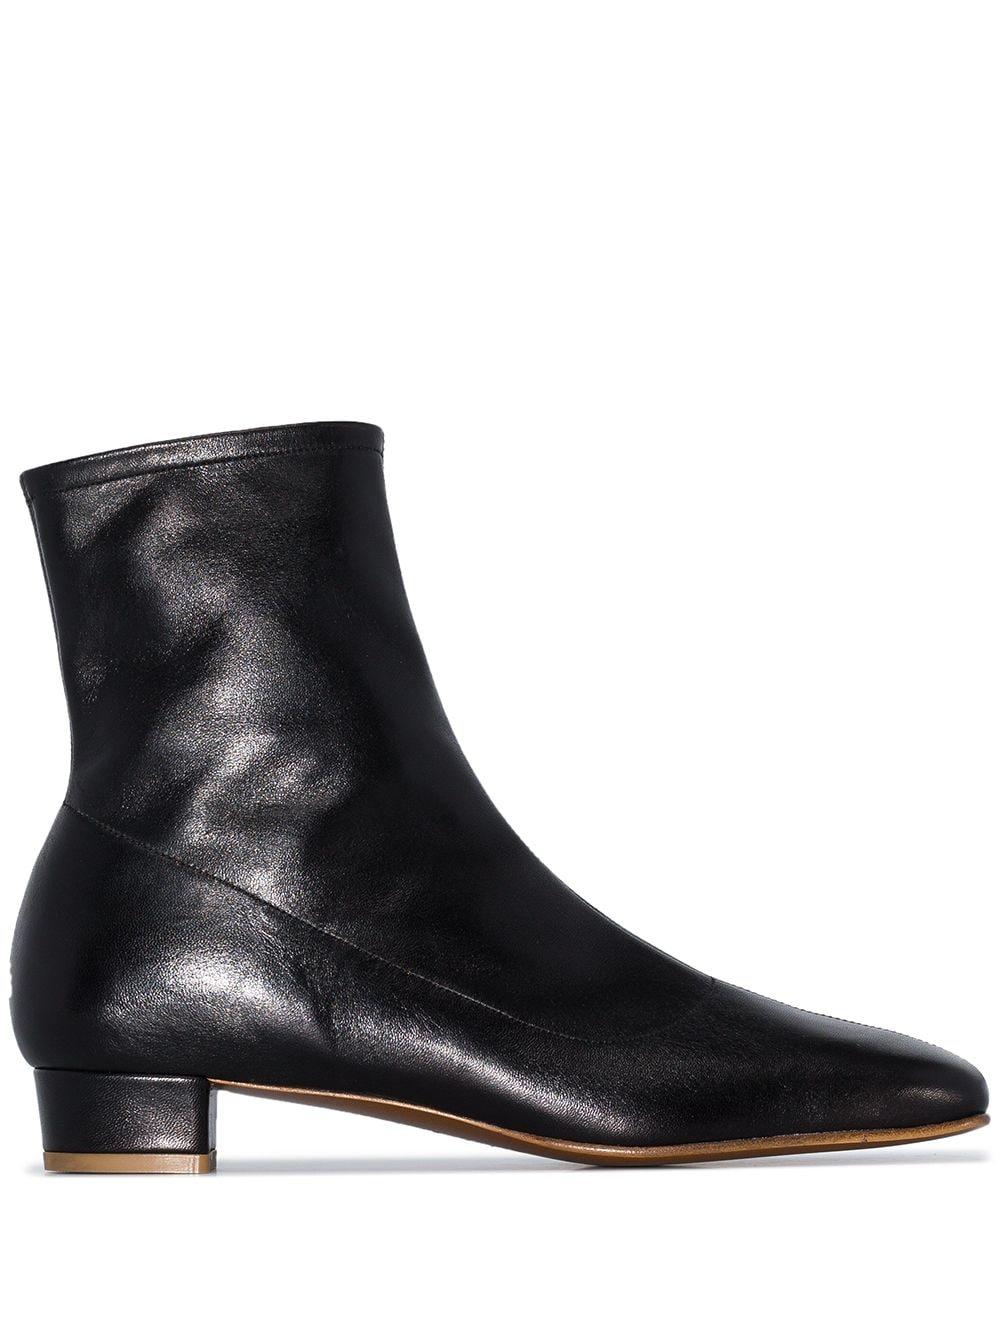 BY FAR Este Leather Ankle Boots in Black - Lyst